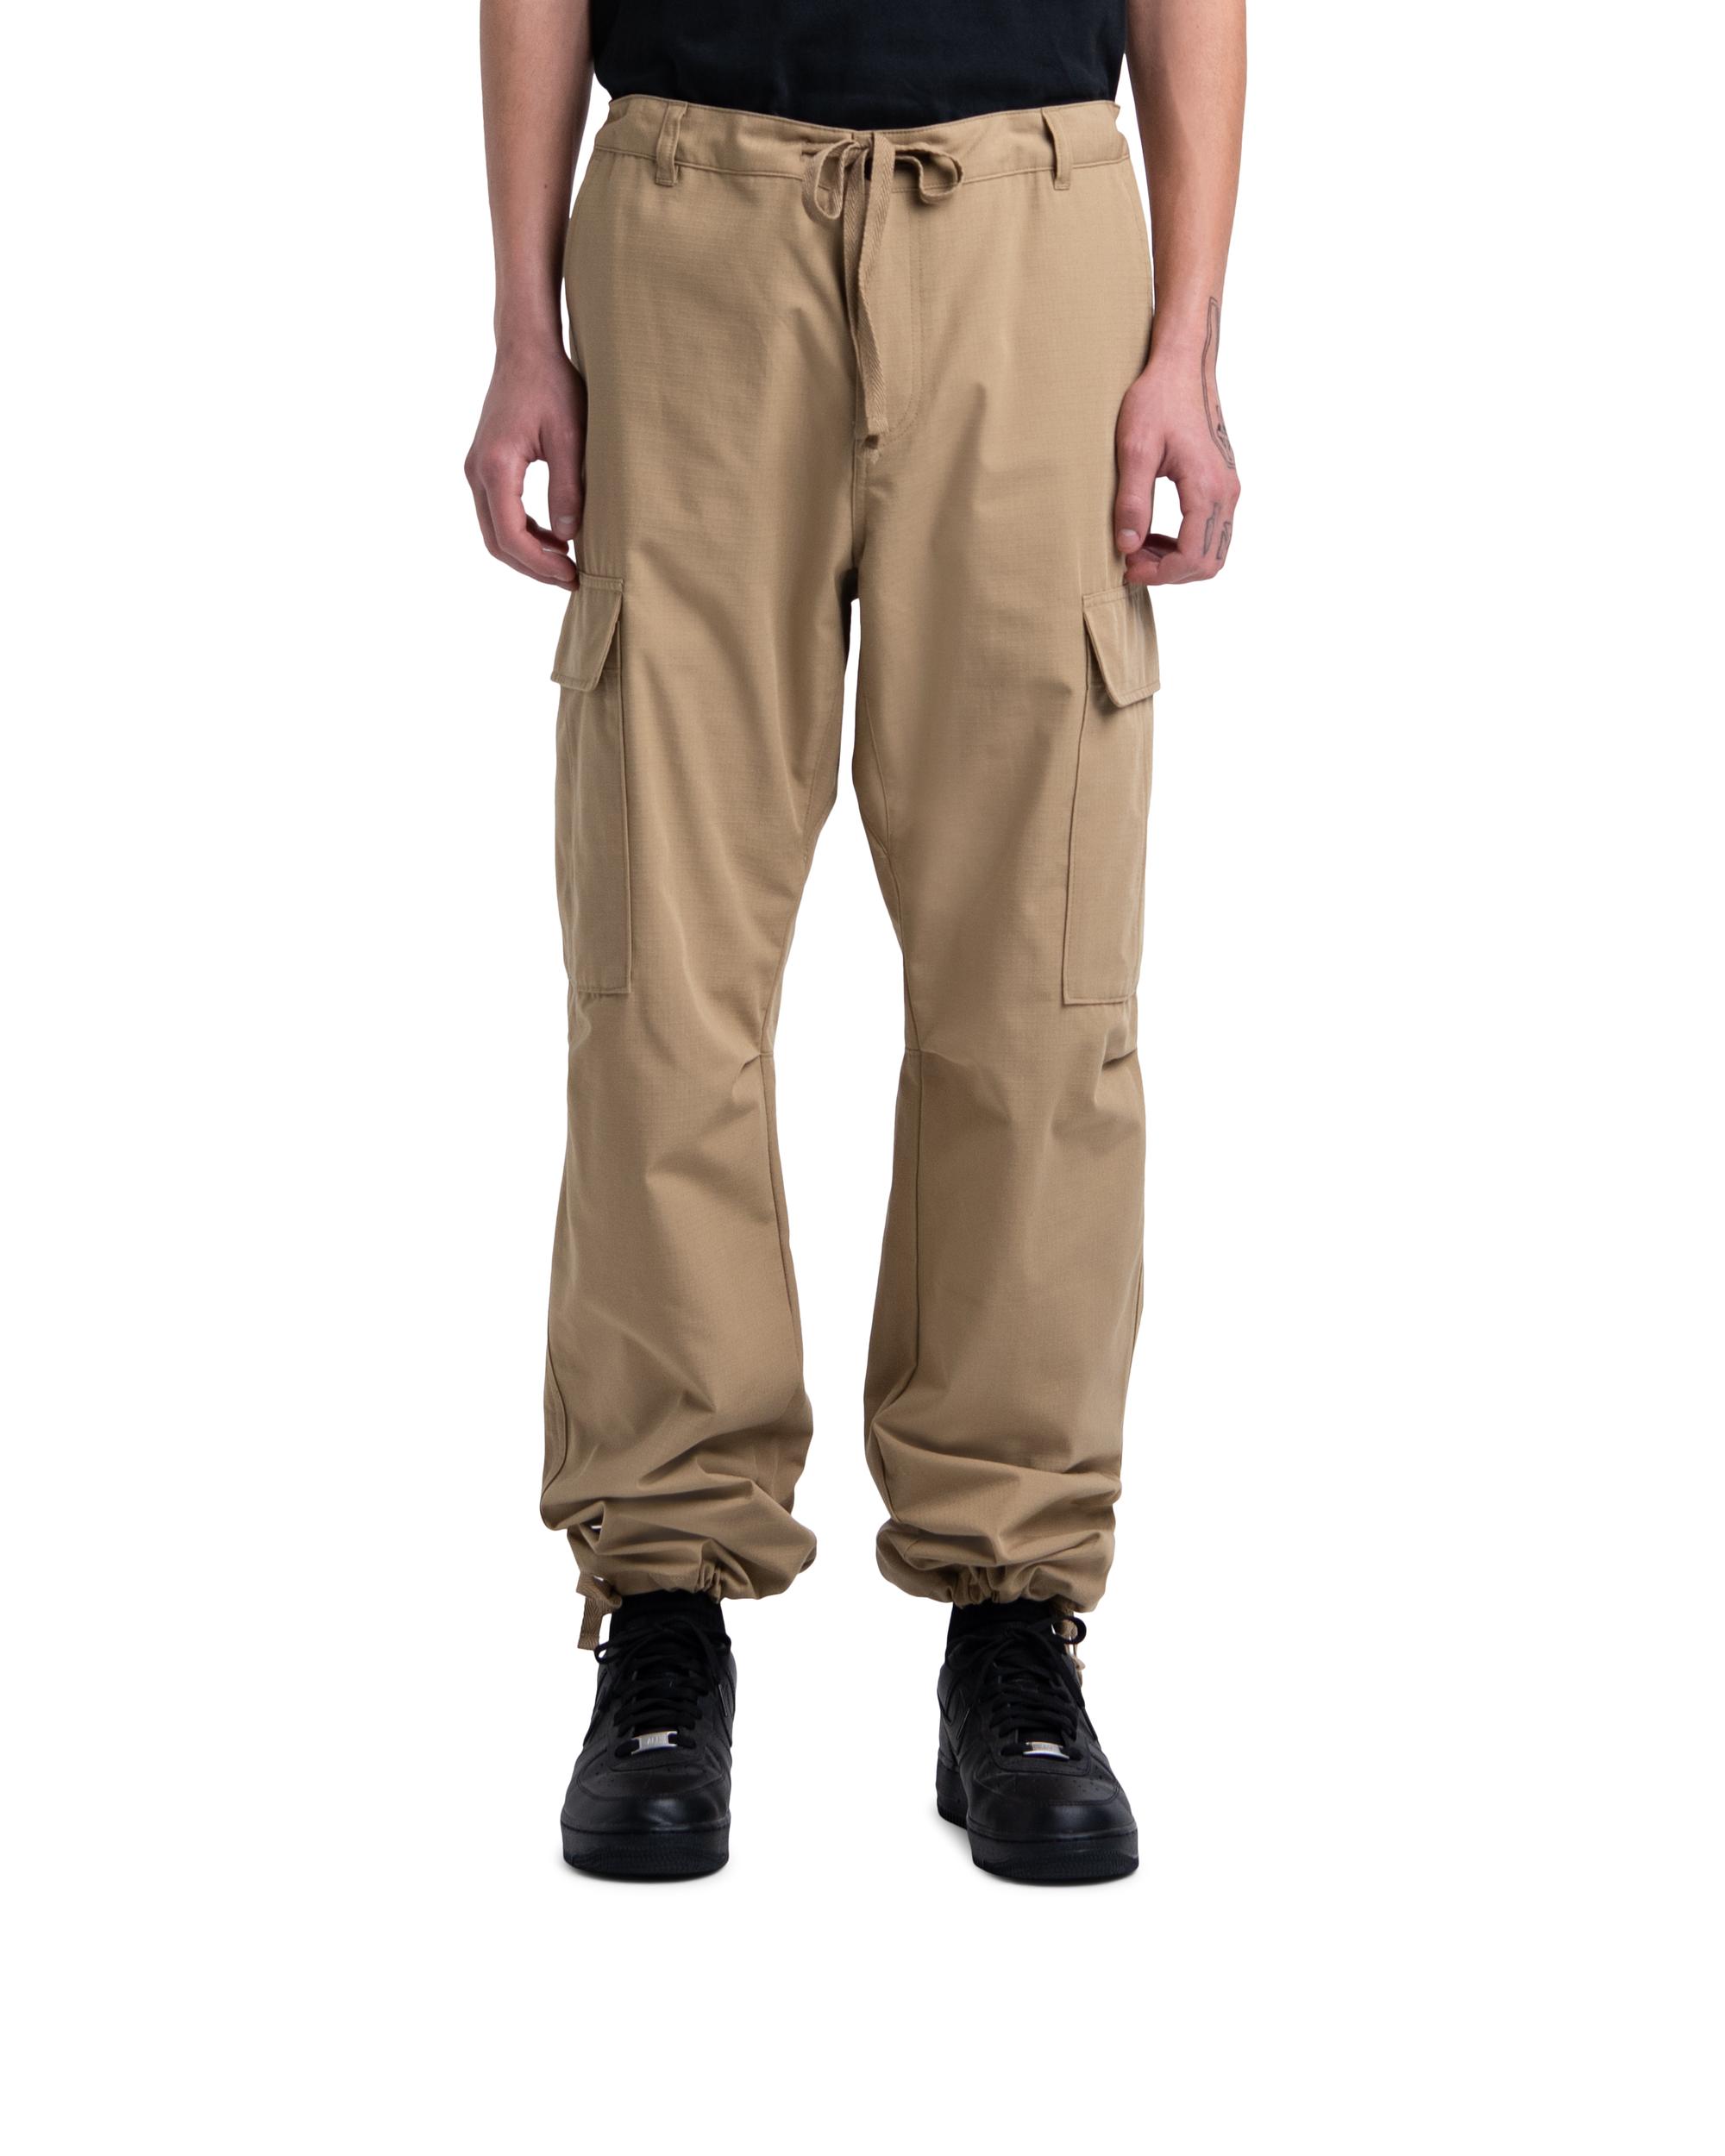 all cargo pants